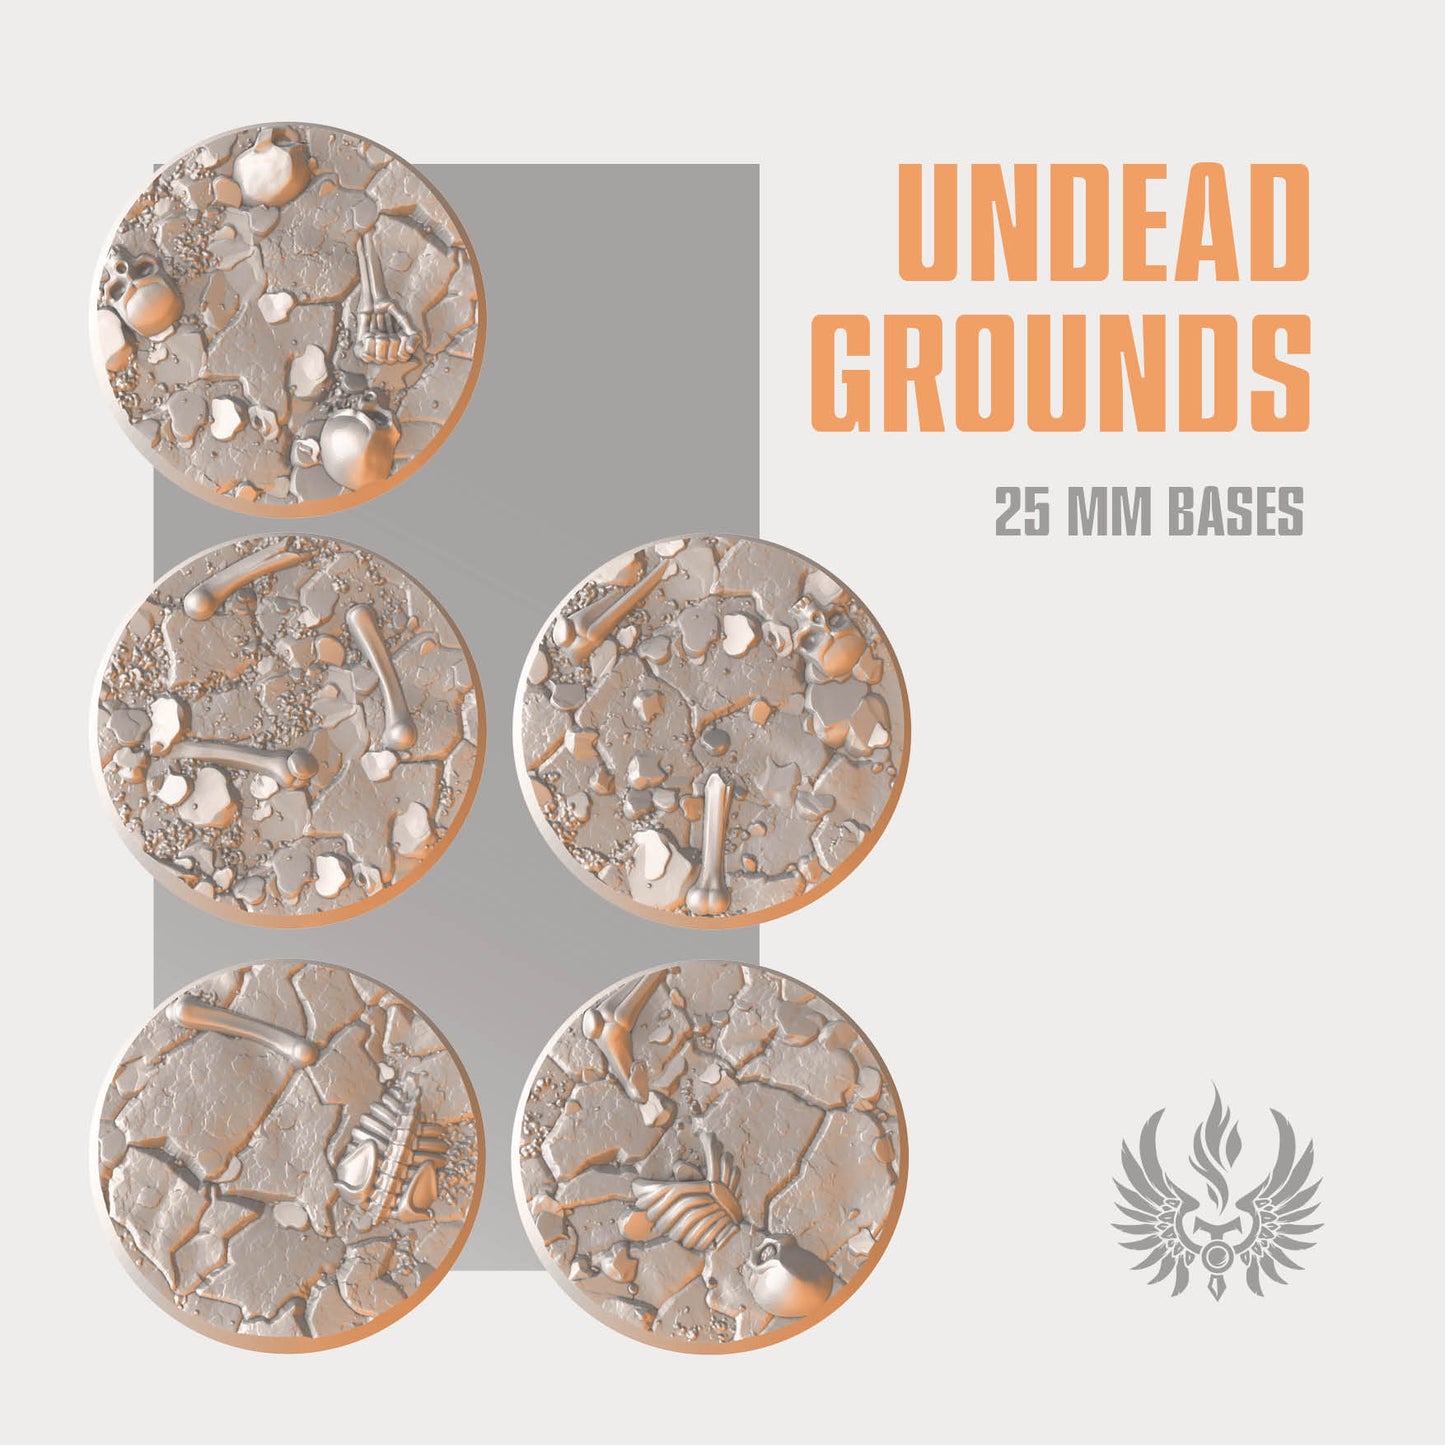 Undead grounds bases 25 mm